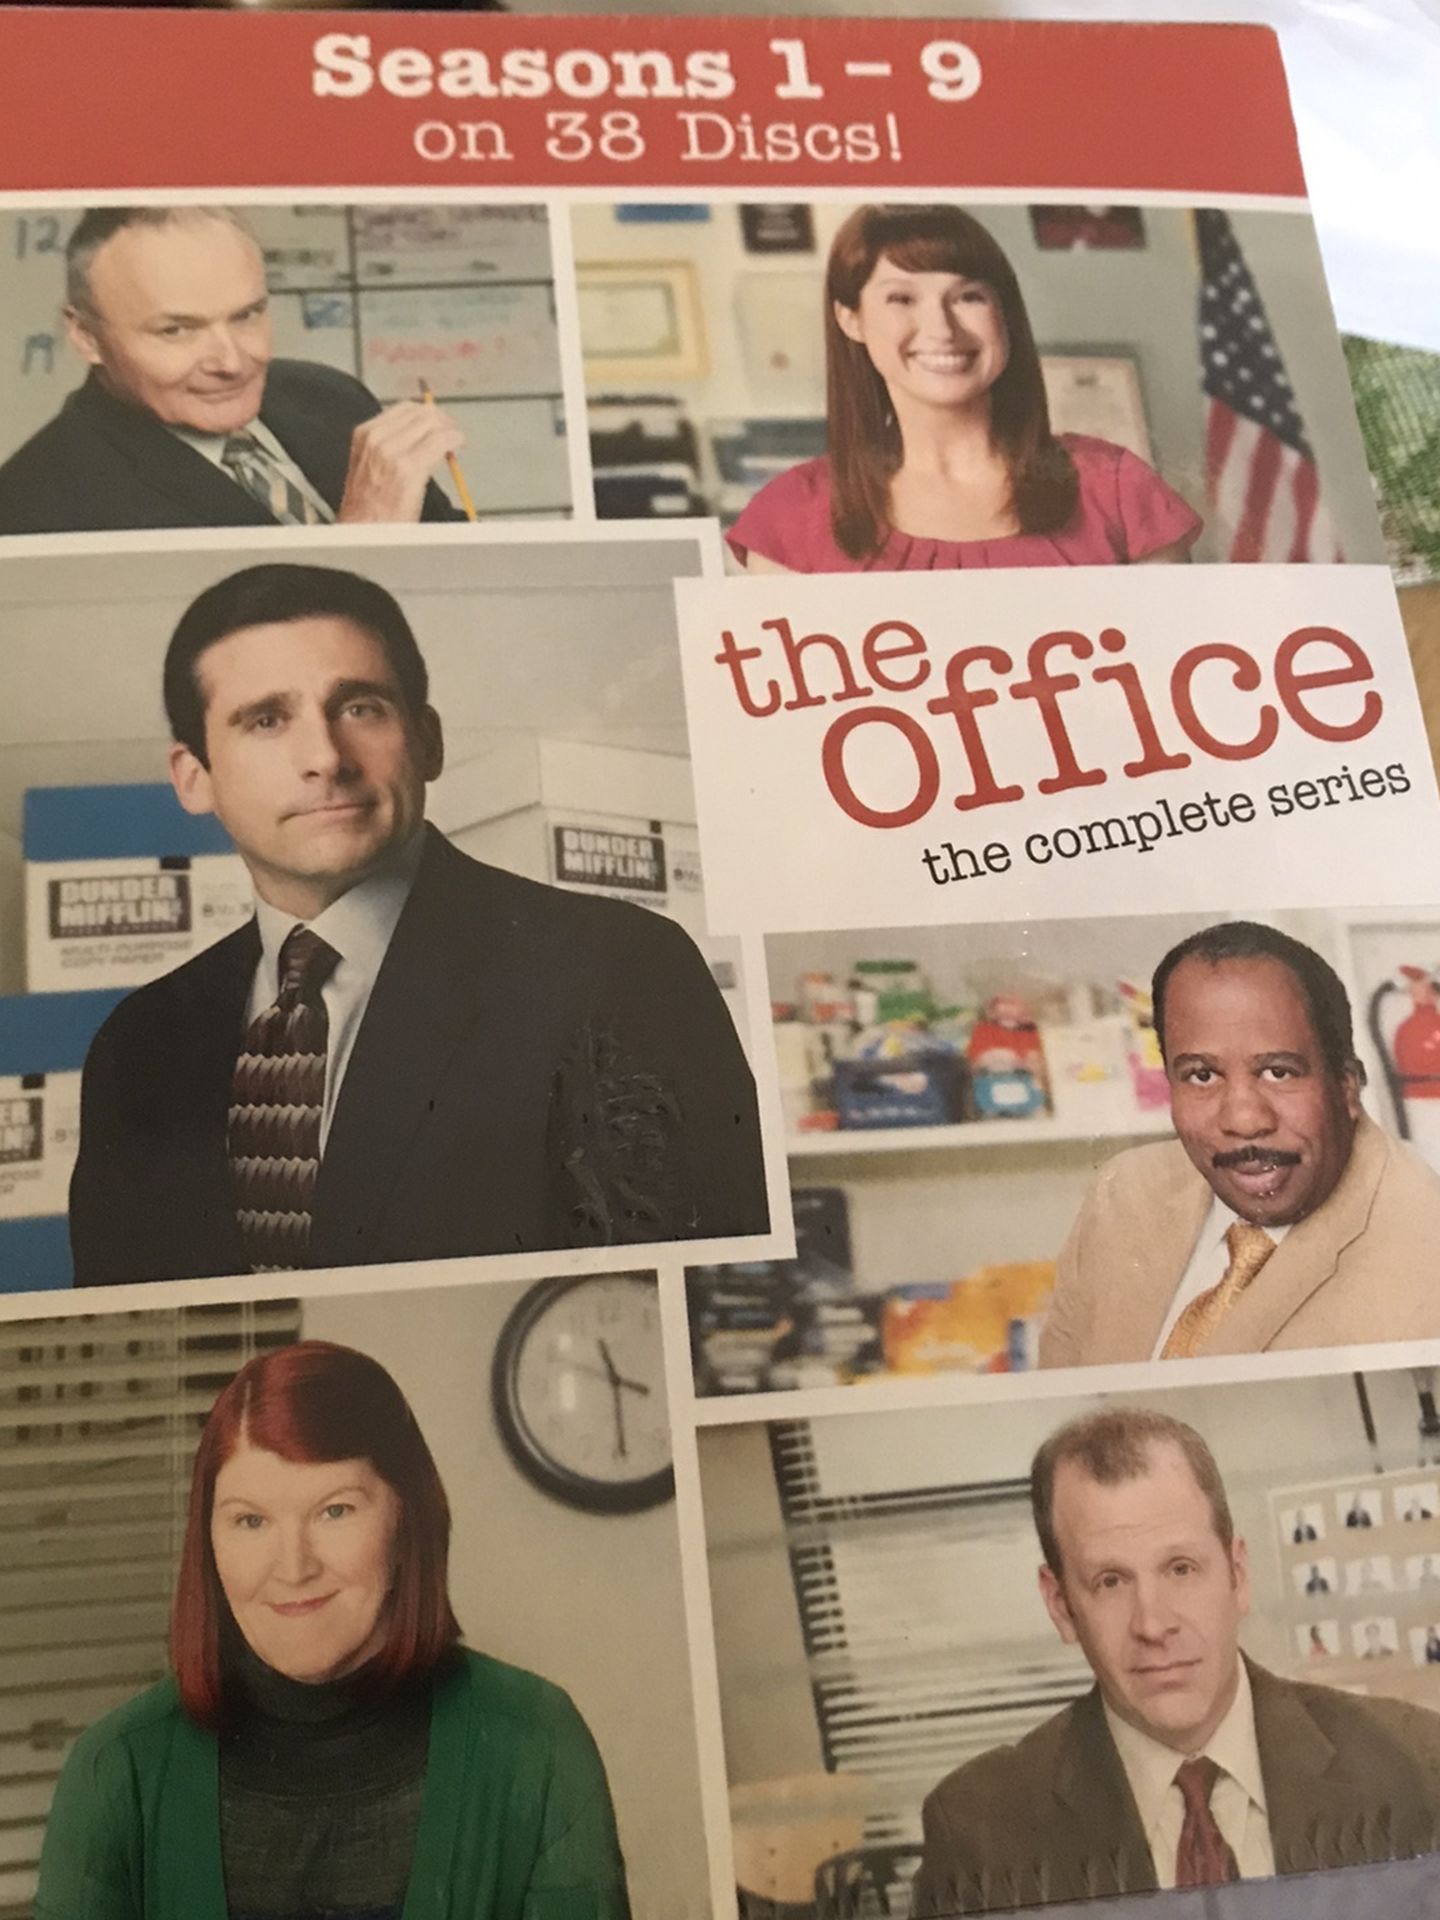 The Office Complete Series DVD Season 1-9 New Unopened Sealed